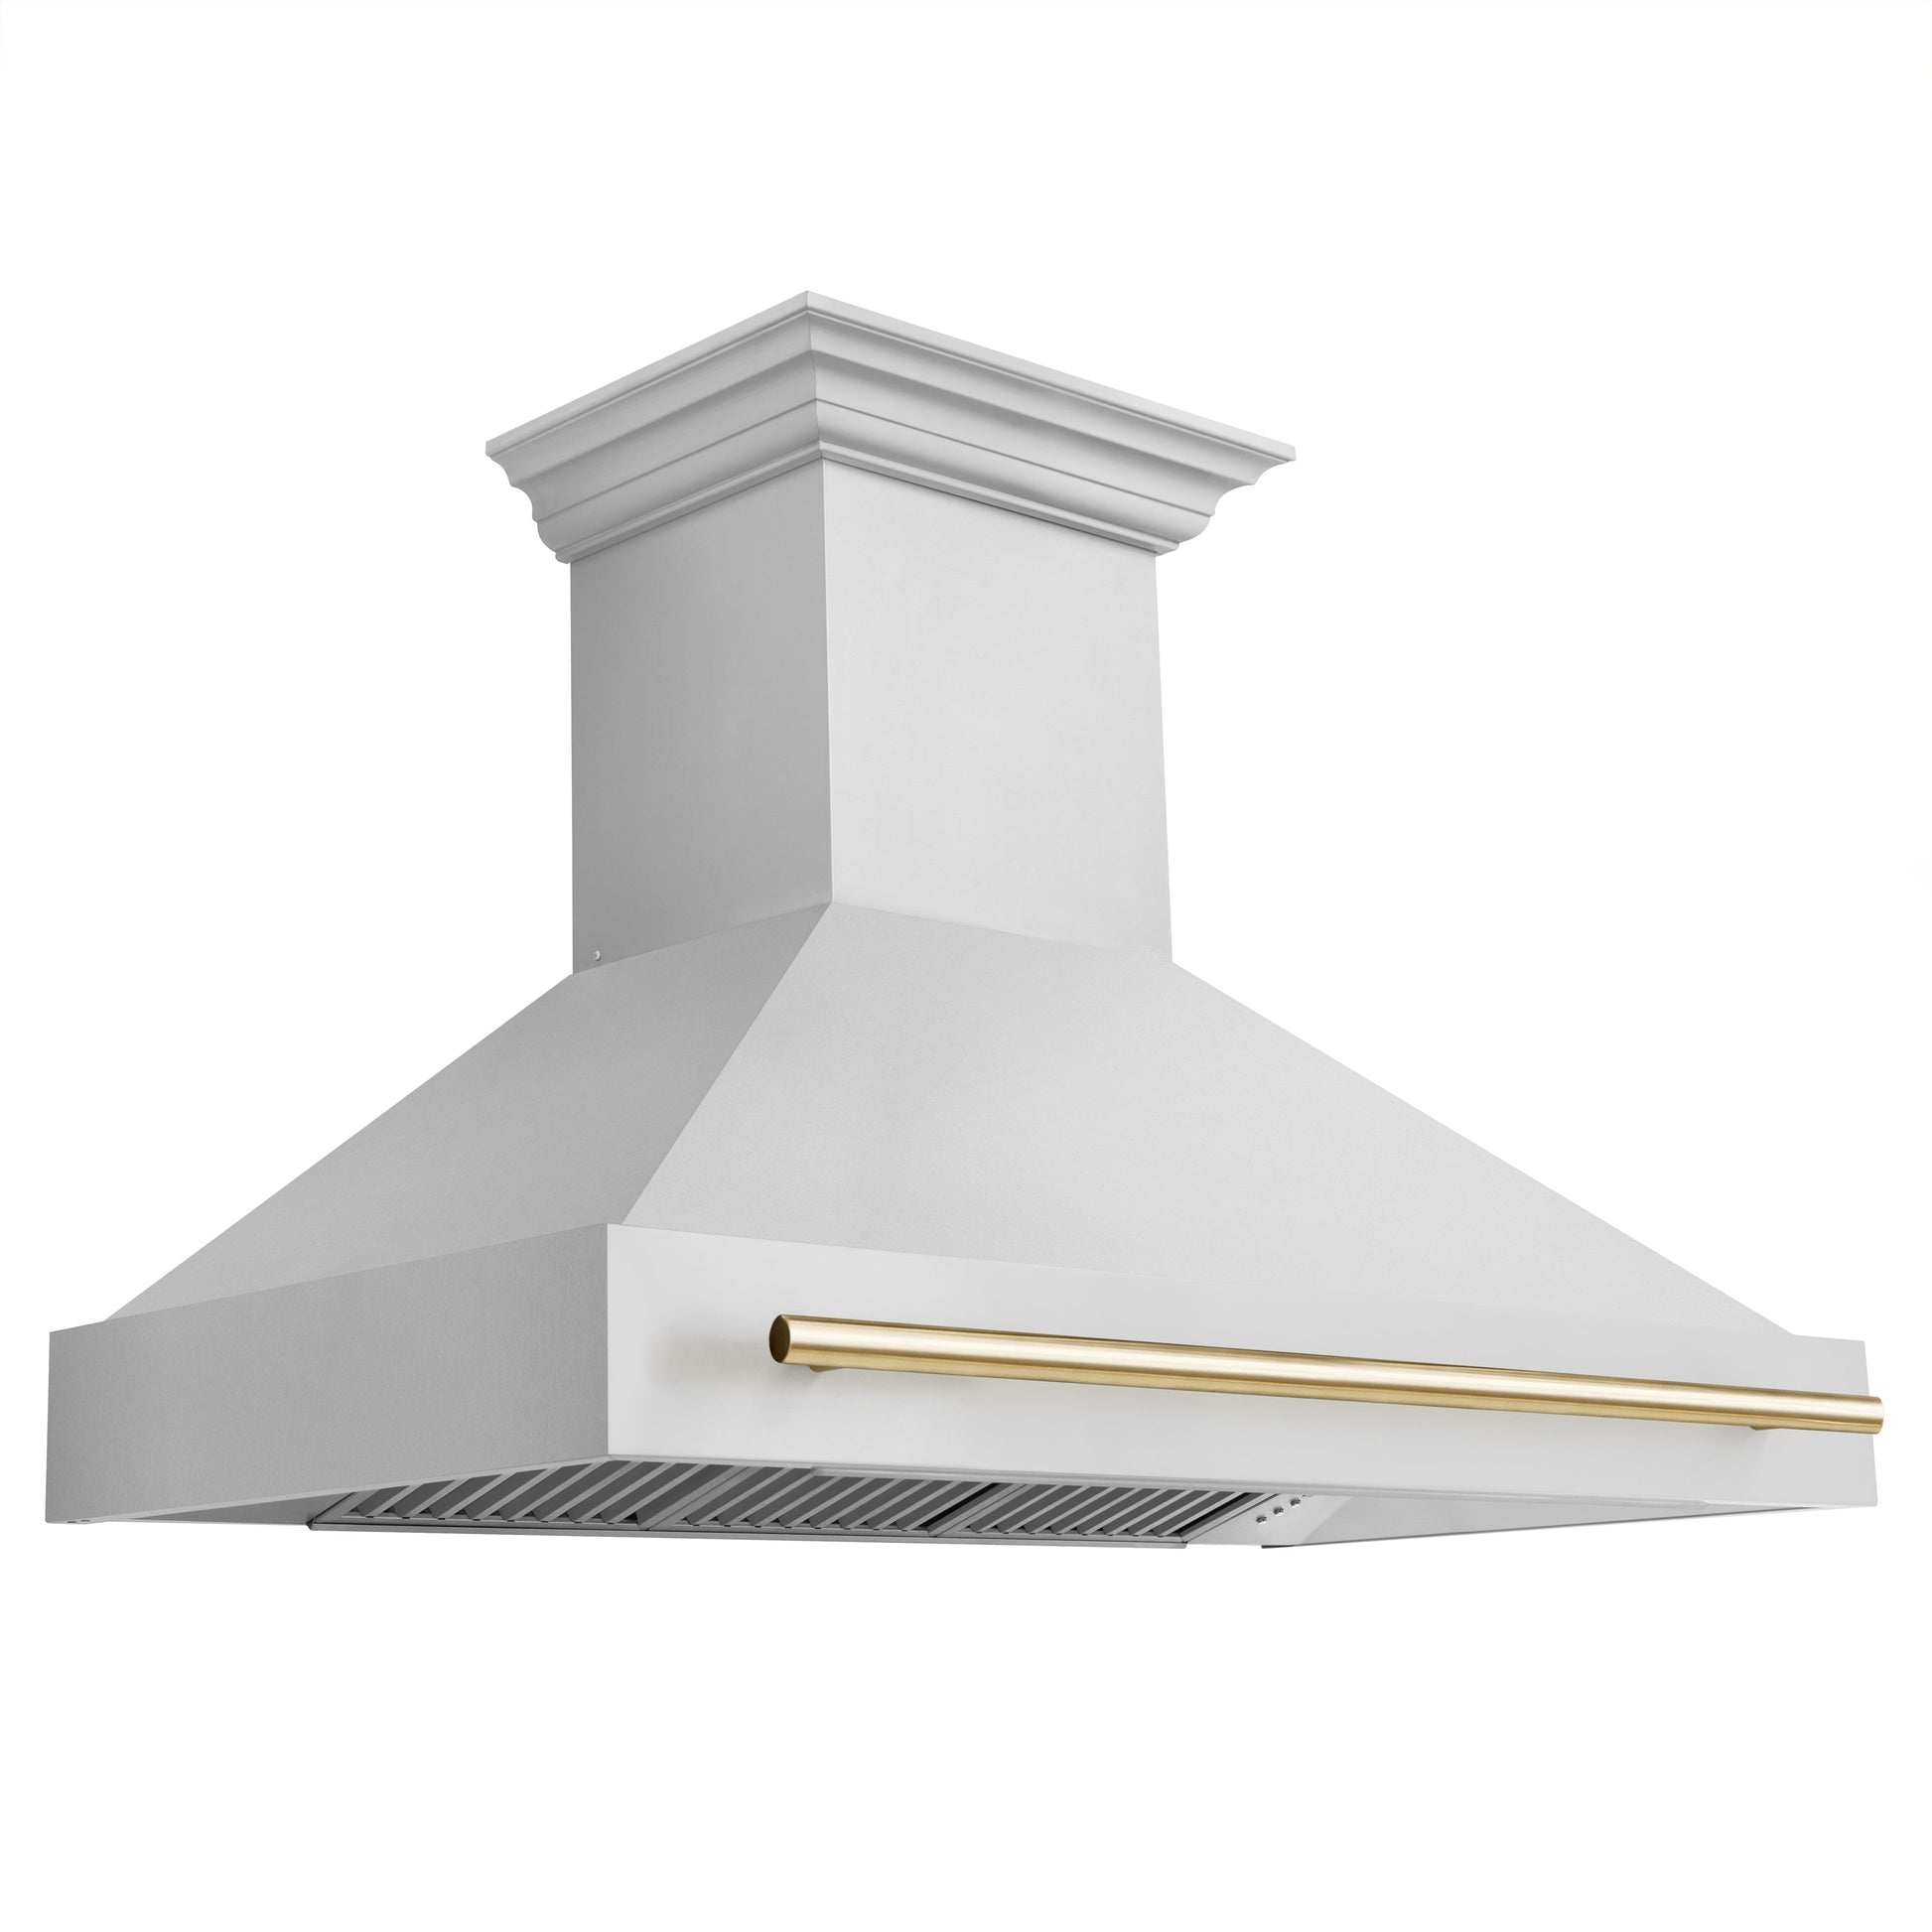 ZLINE 48" Autograph Edition 4 Appliance Package with Stainless Steel Dual Fuel Range, Range Hood, Dishwasher, and Refrigeration - Polished Gold Accents